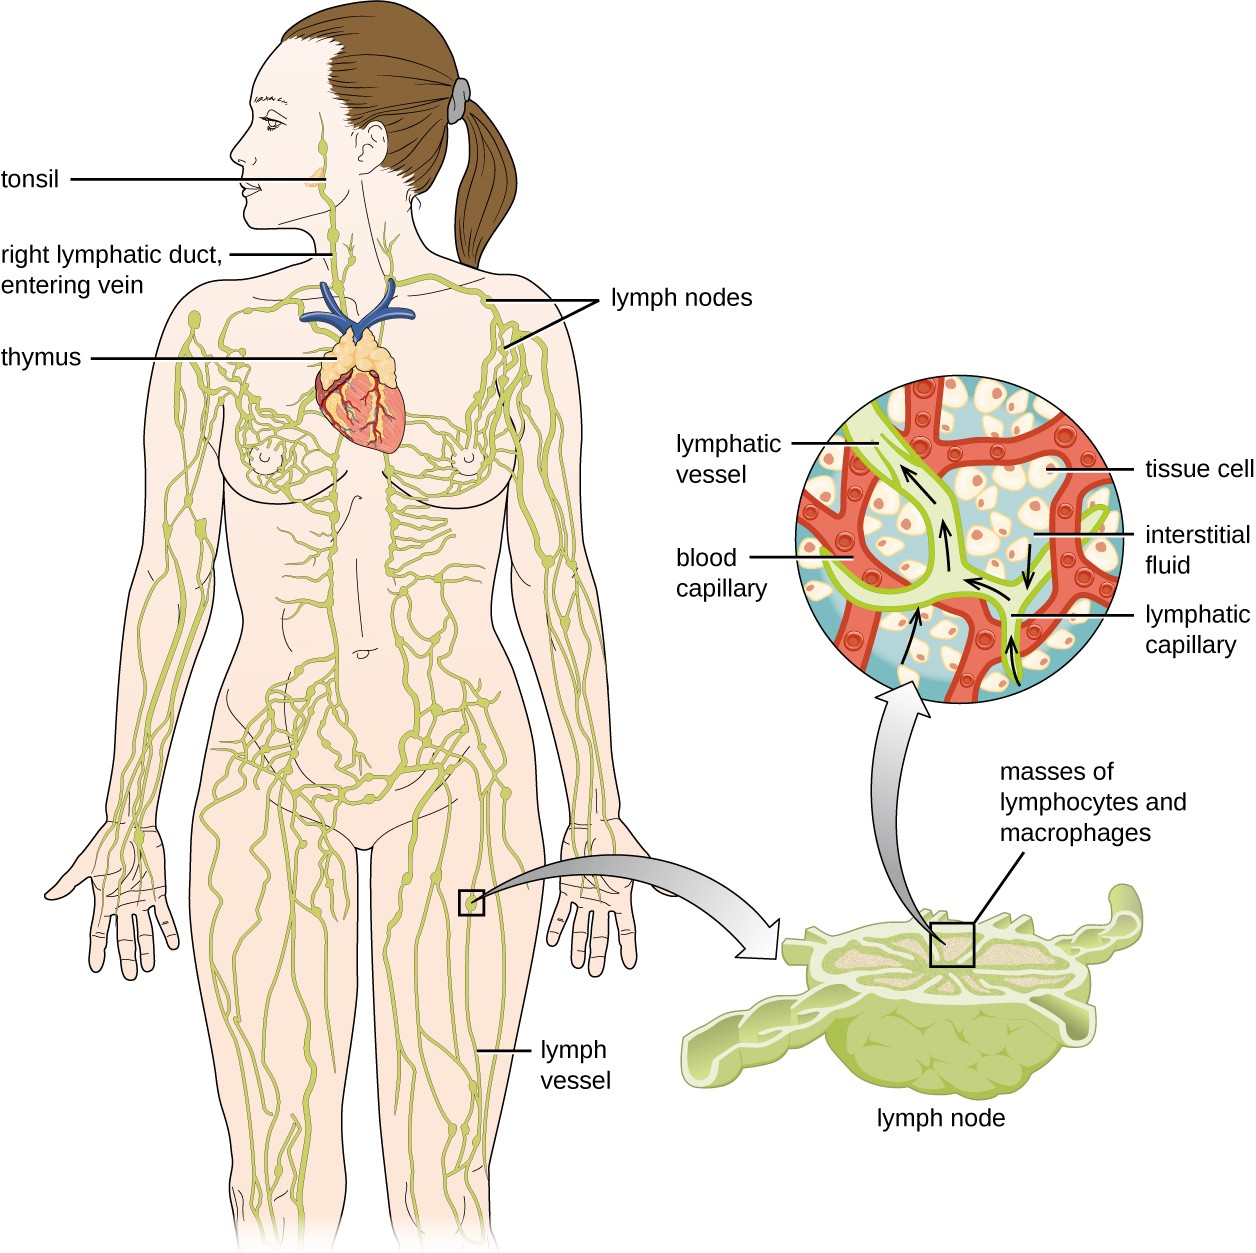 Diagram of the lymphatic system. Lymph notes are swellings on tubes (called lymph vessels) that travel throughout the body. The right lymphatic duct and entering vein are in the neck. A tonsil is a swelling on the lymph vessel in the mouth. The thymus is a lumpy structure on the heart. A close-up of a lymph node shows a roundish structure with many tubes attached to it. The central area has a box labeled 